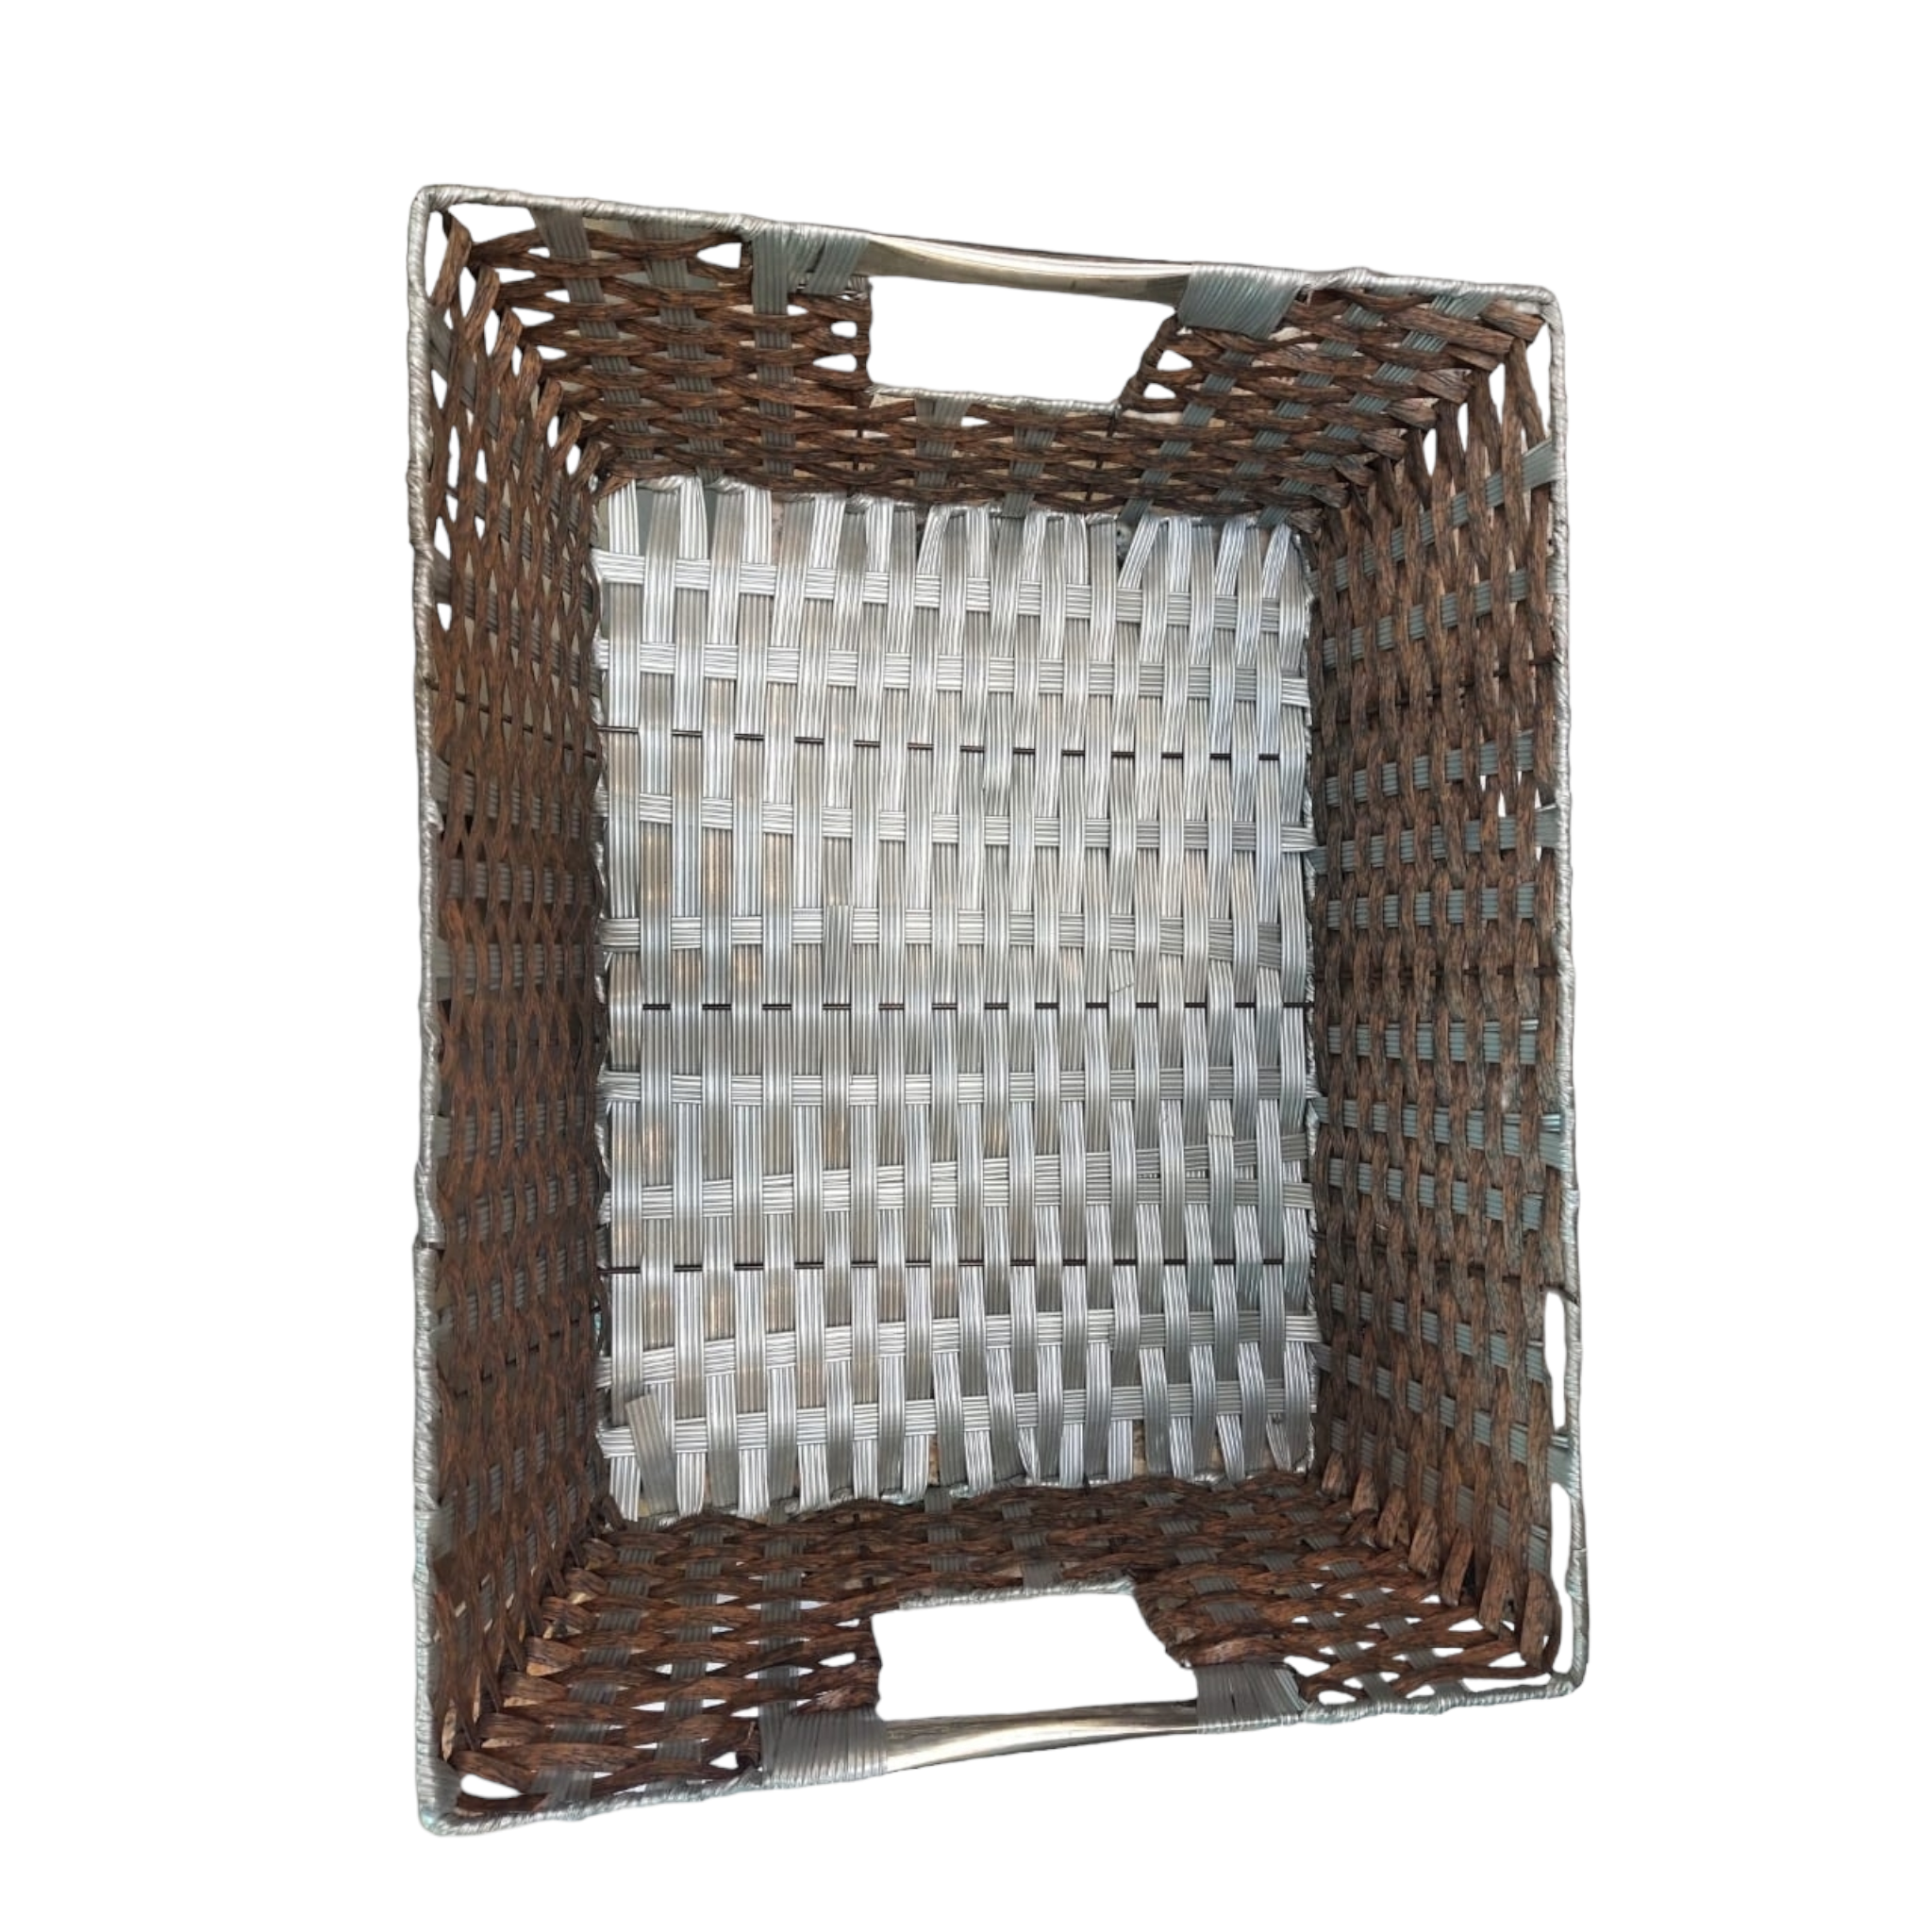 Plastic Woven Fruit Serving Tray Basket Small 29.5x39x10cm 026